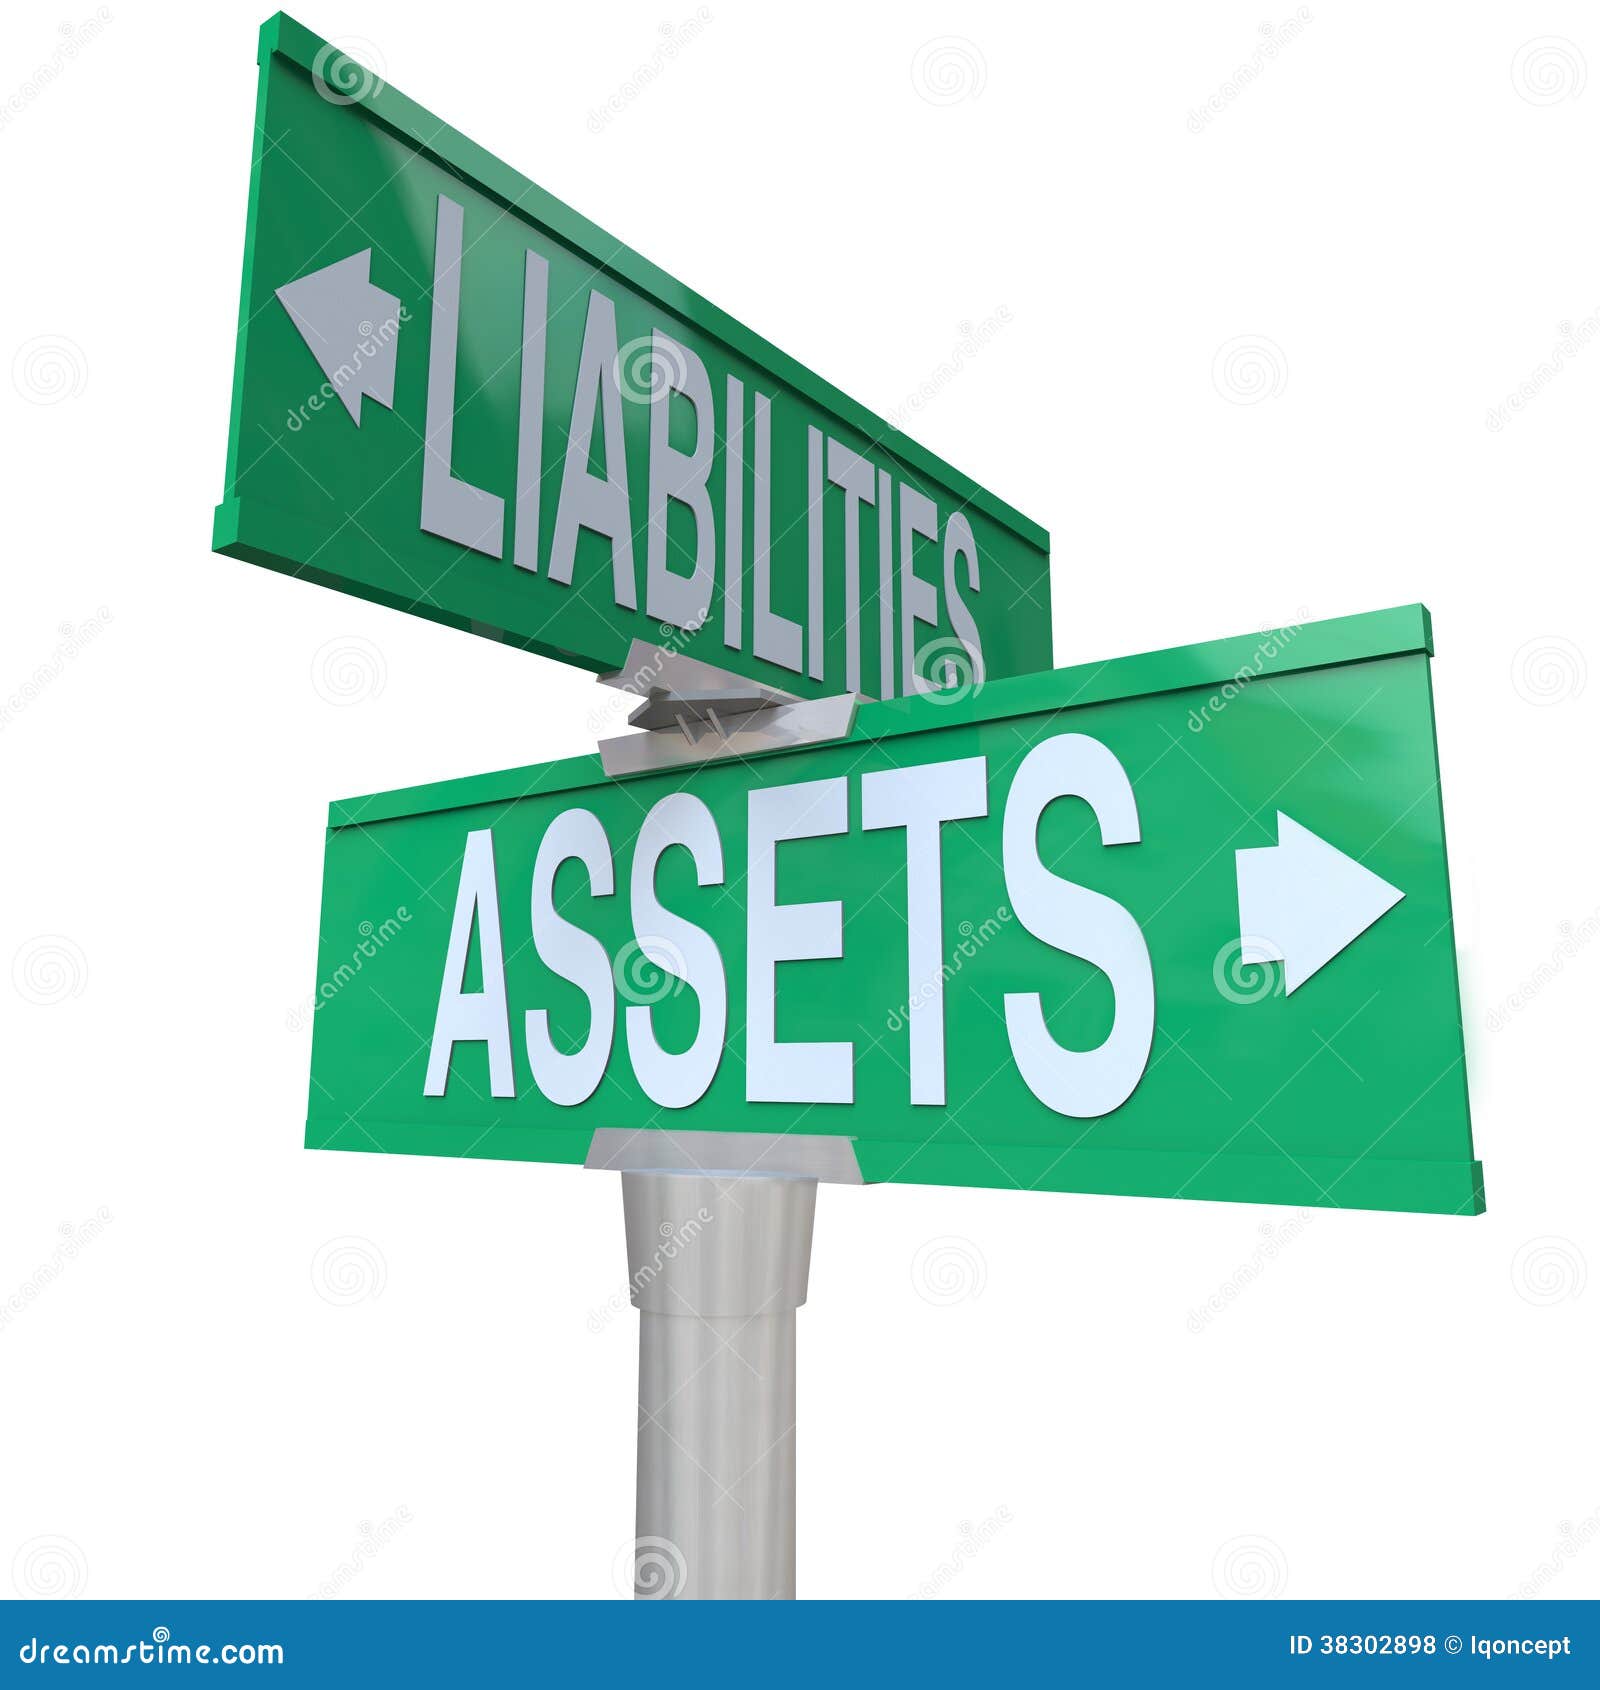 assets vs liabilities two way road street signs accounting